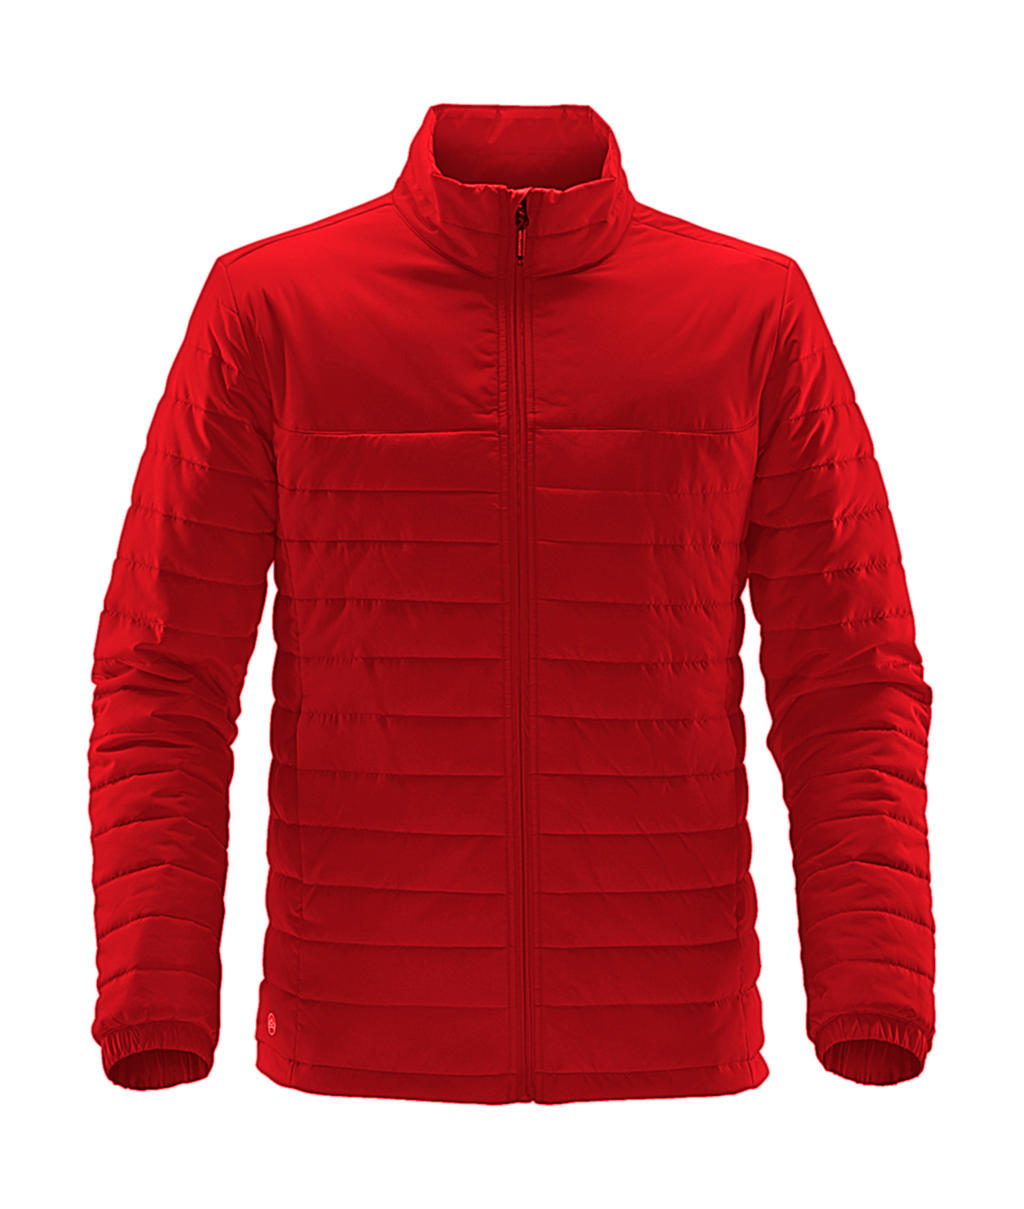  Nautilus Thermal Jacket in Farbe Bright Red